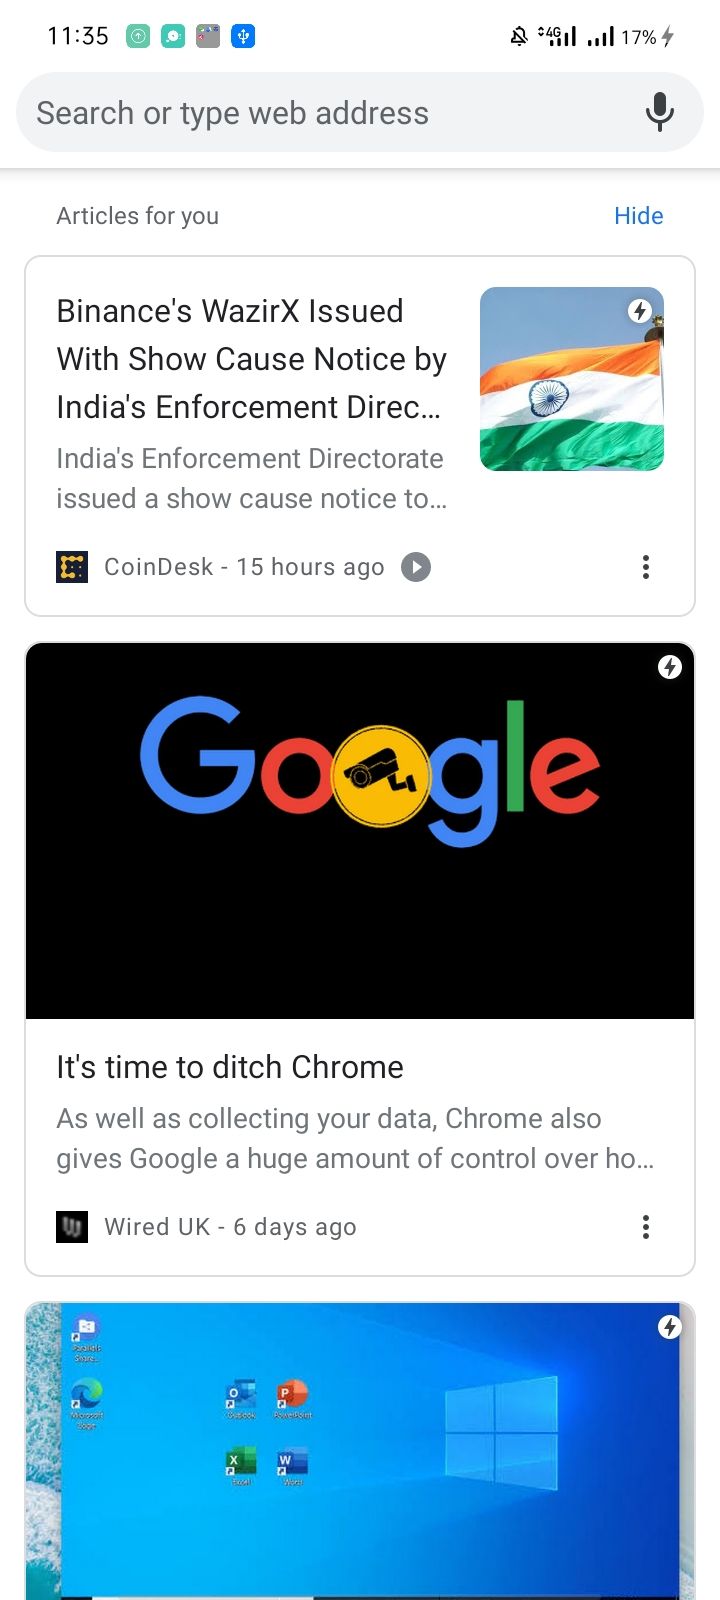 Suggested Articles Showing in Google Chrome